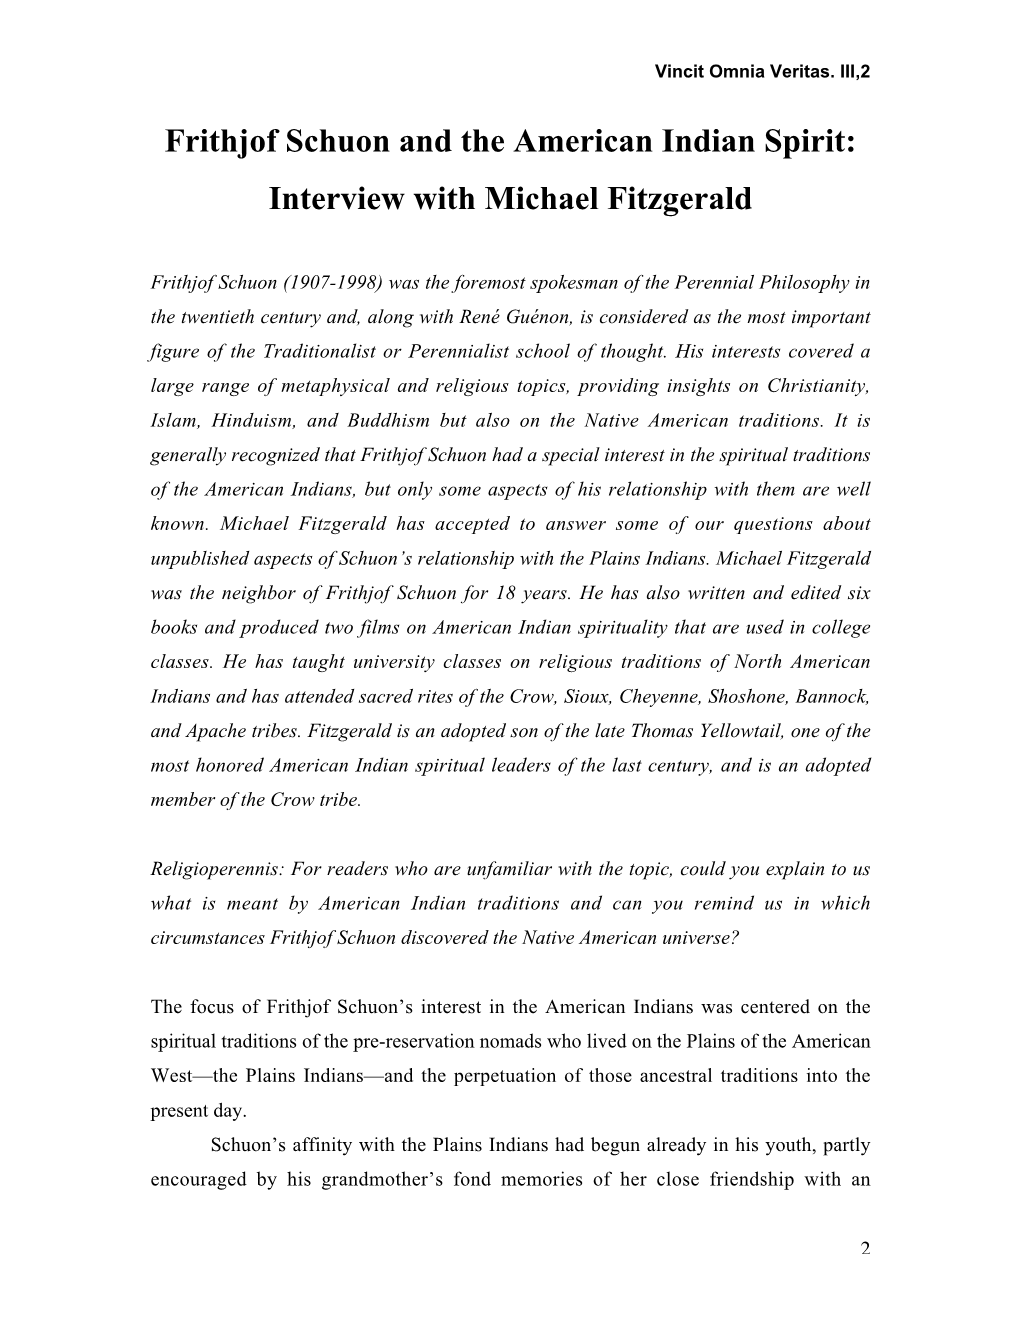 Frithjof Schuon and the American Indian Spirit: Interview with Michael Fitzgerald